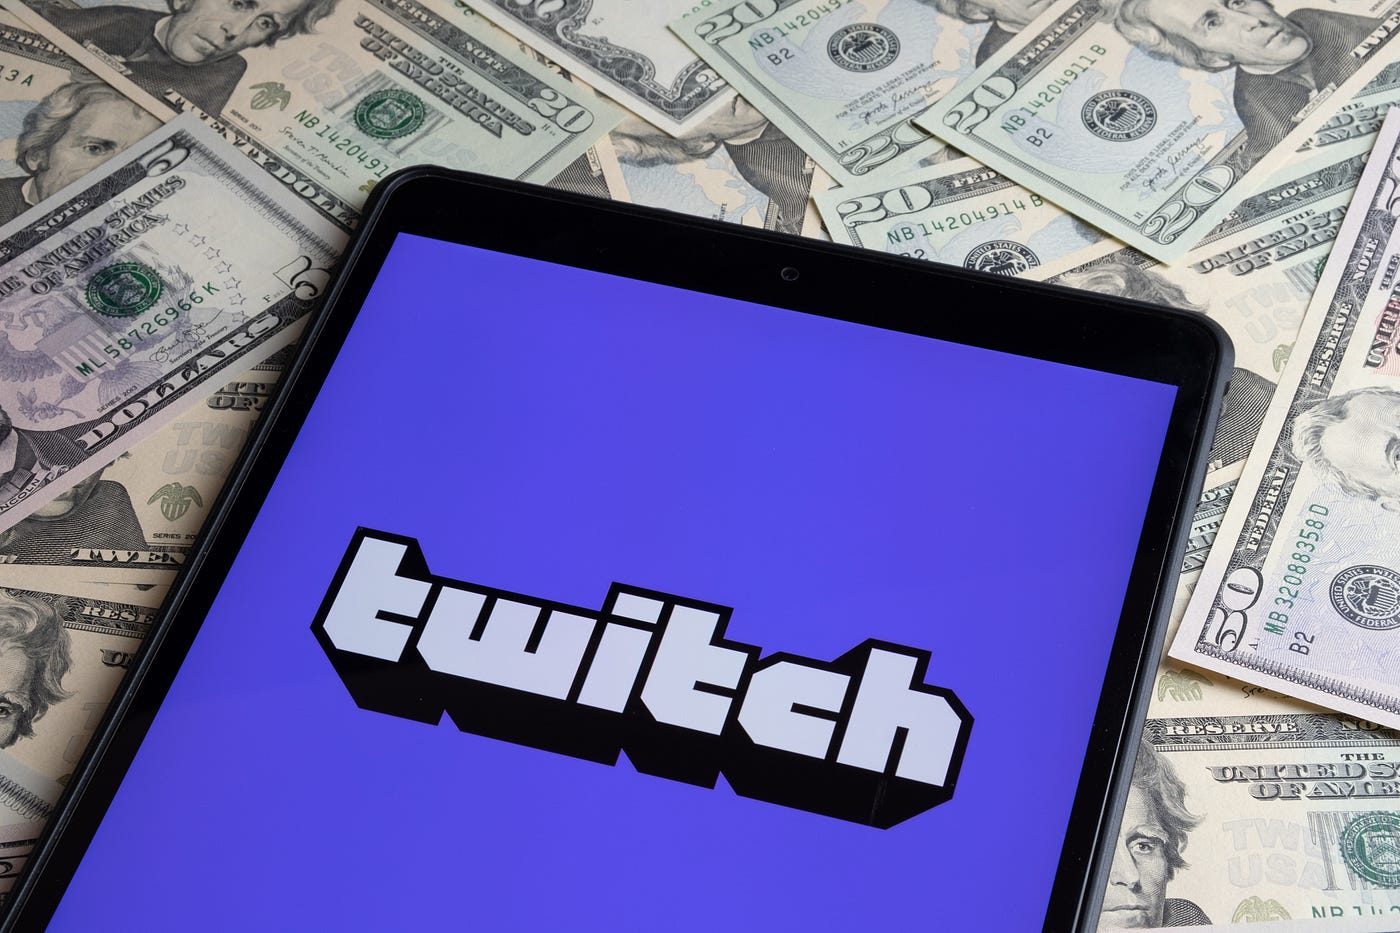 How do Twitch Streamers Make Money in 2022?